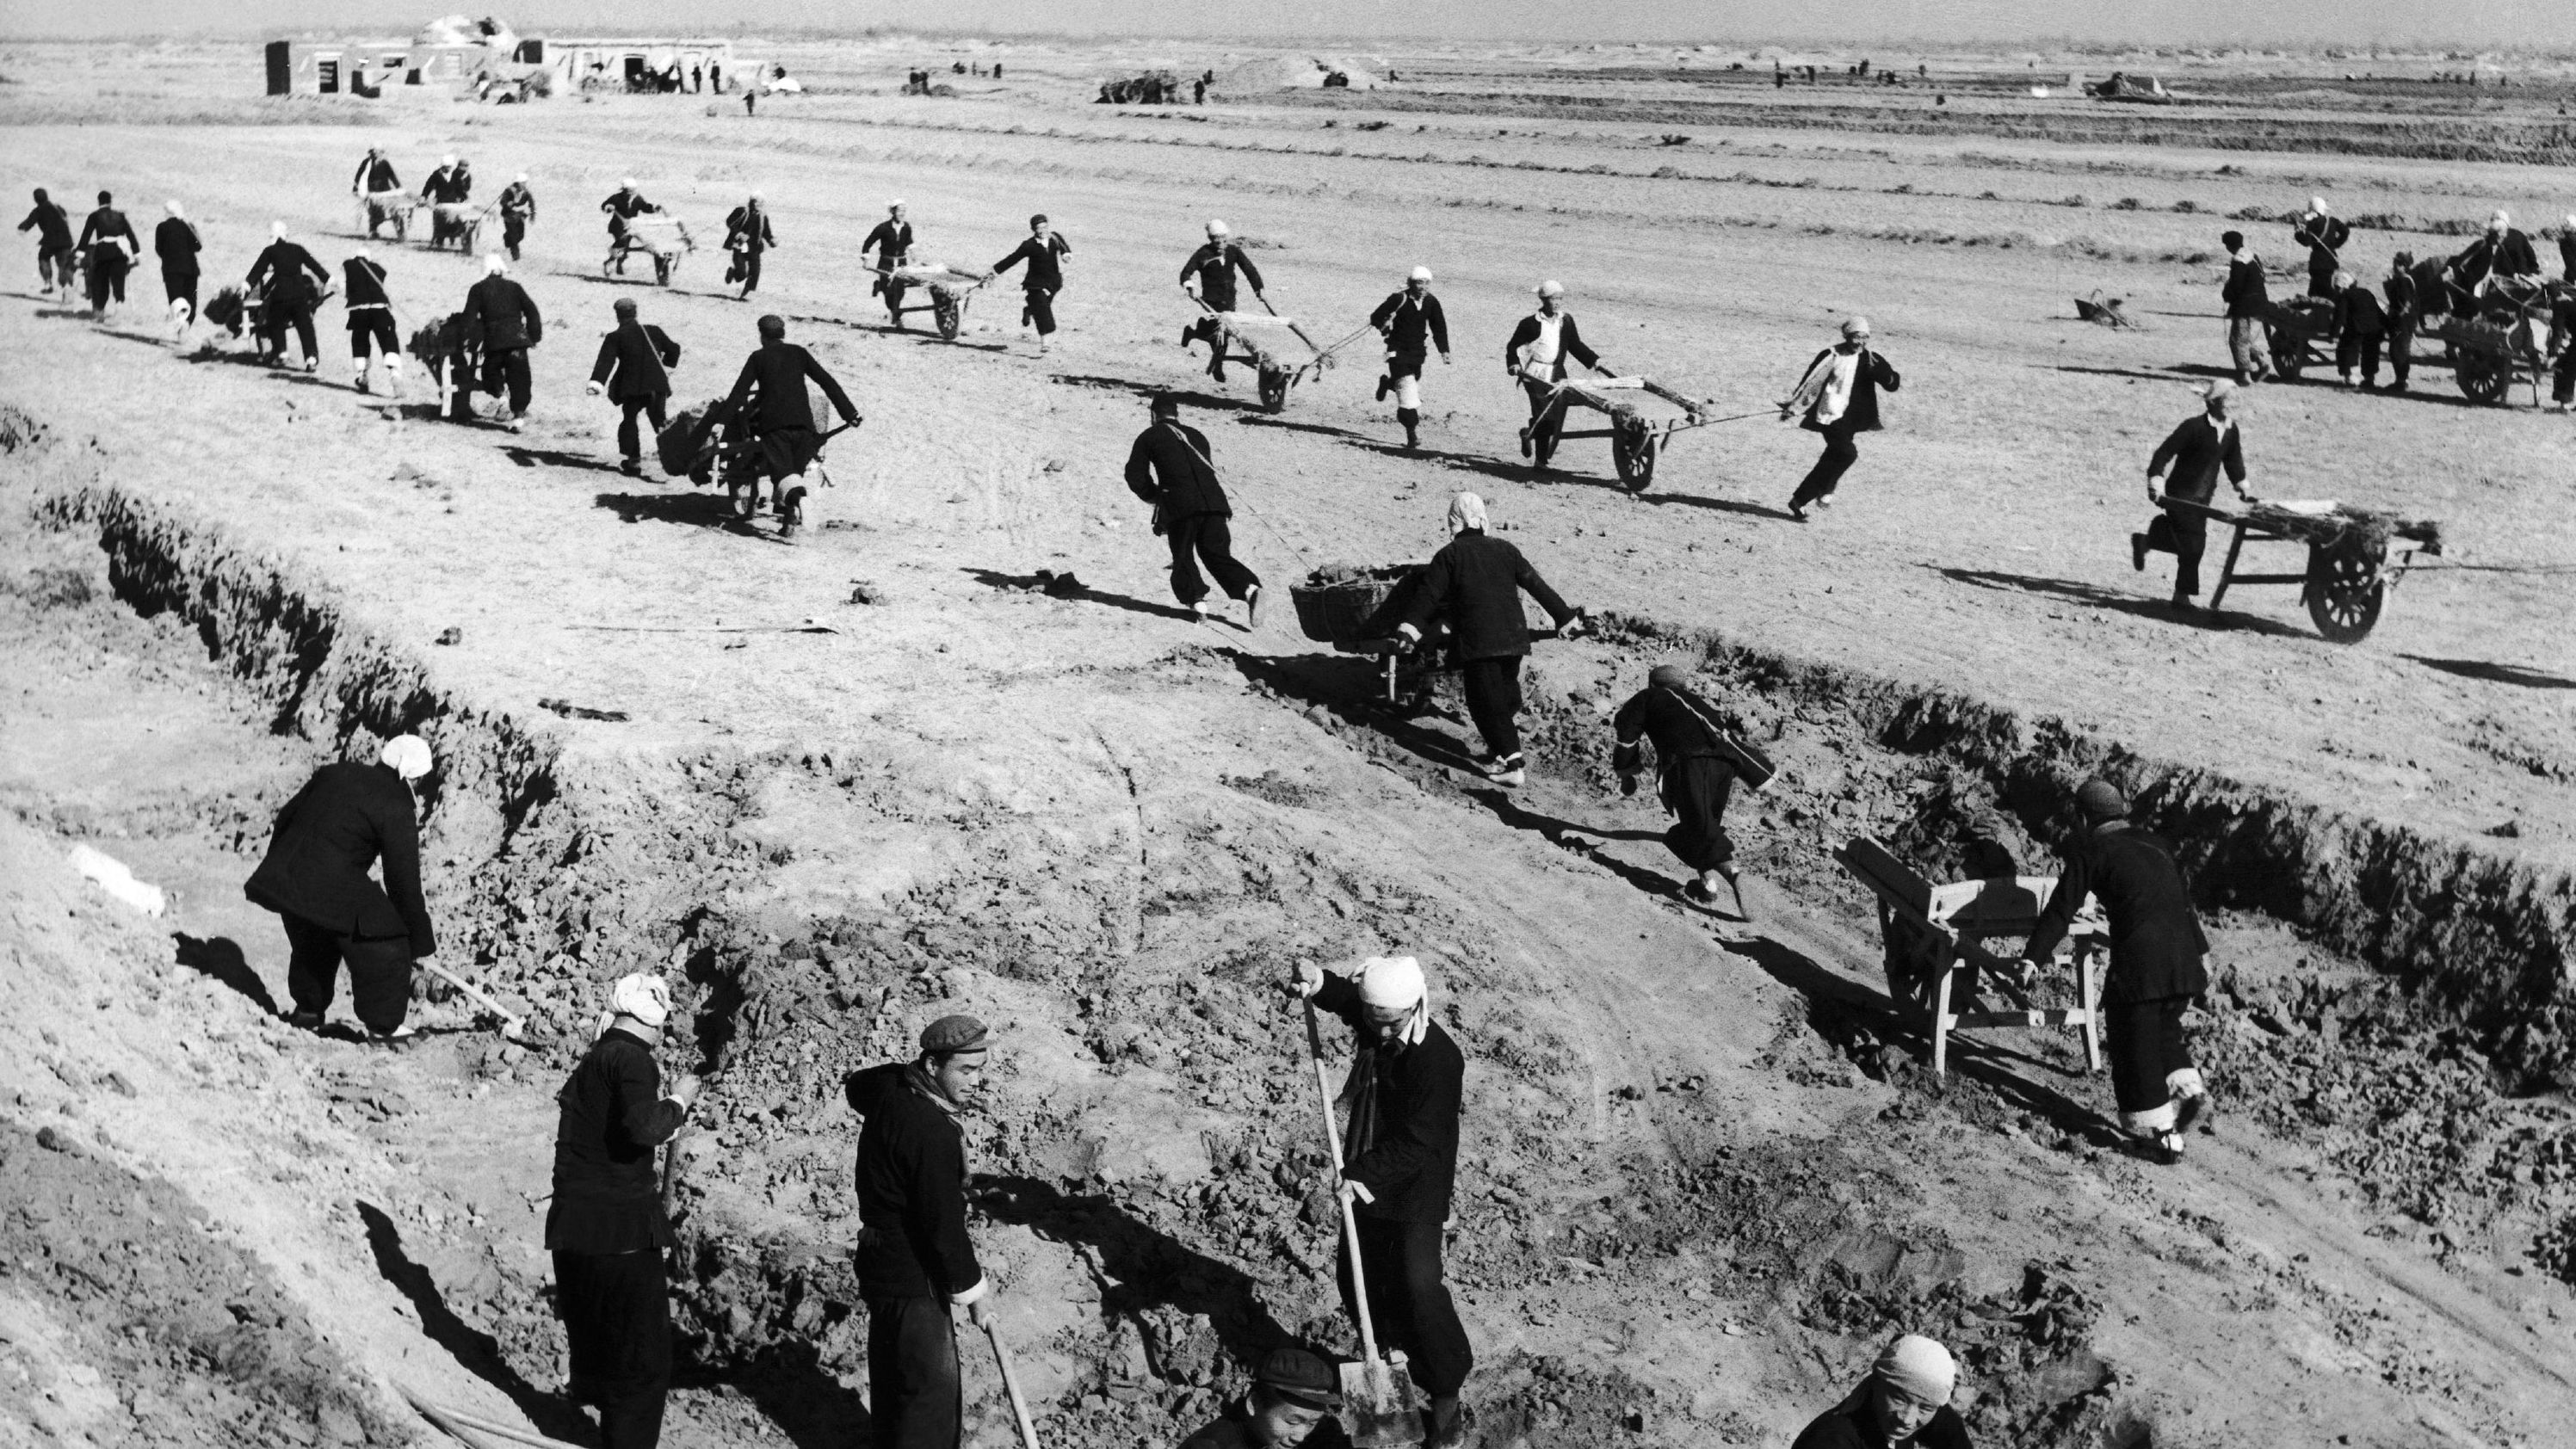 People in China's Shandong province build a water reservoir in February 1958. By the late 1950s, Mao was making plans to catch up quickly with the world's industrialized nations. During what became known as the Great Leap Forward, the Chinese government tried to advance the country's industrial and agricultural production by eliminating private farms and creating huge collectives. But the swift changes caused grain output to plummet, plunging China into a mass famine that would kill an estimated tens of millions of people.